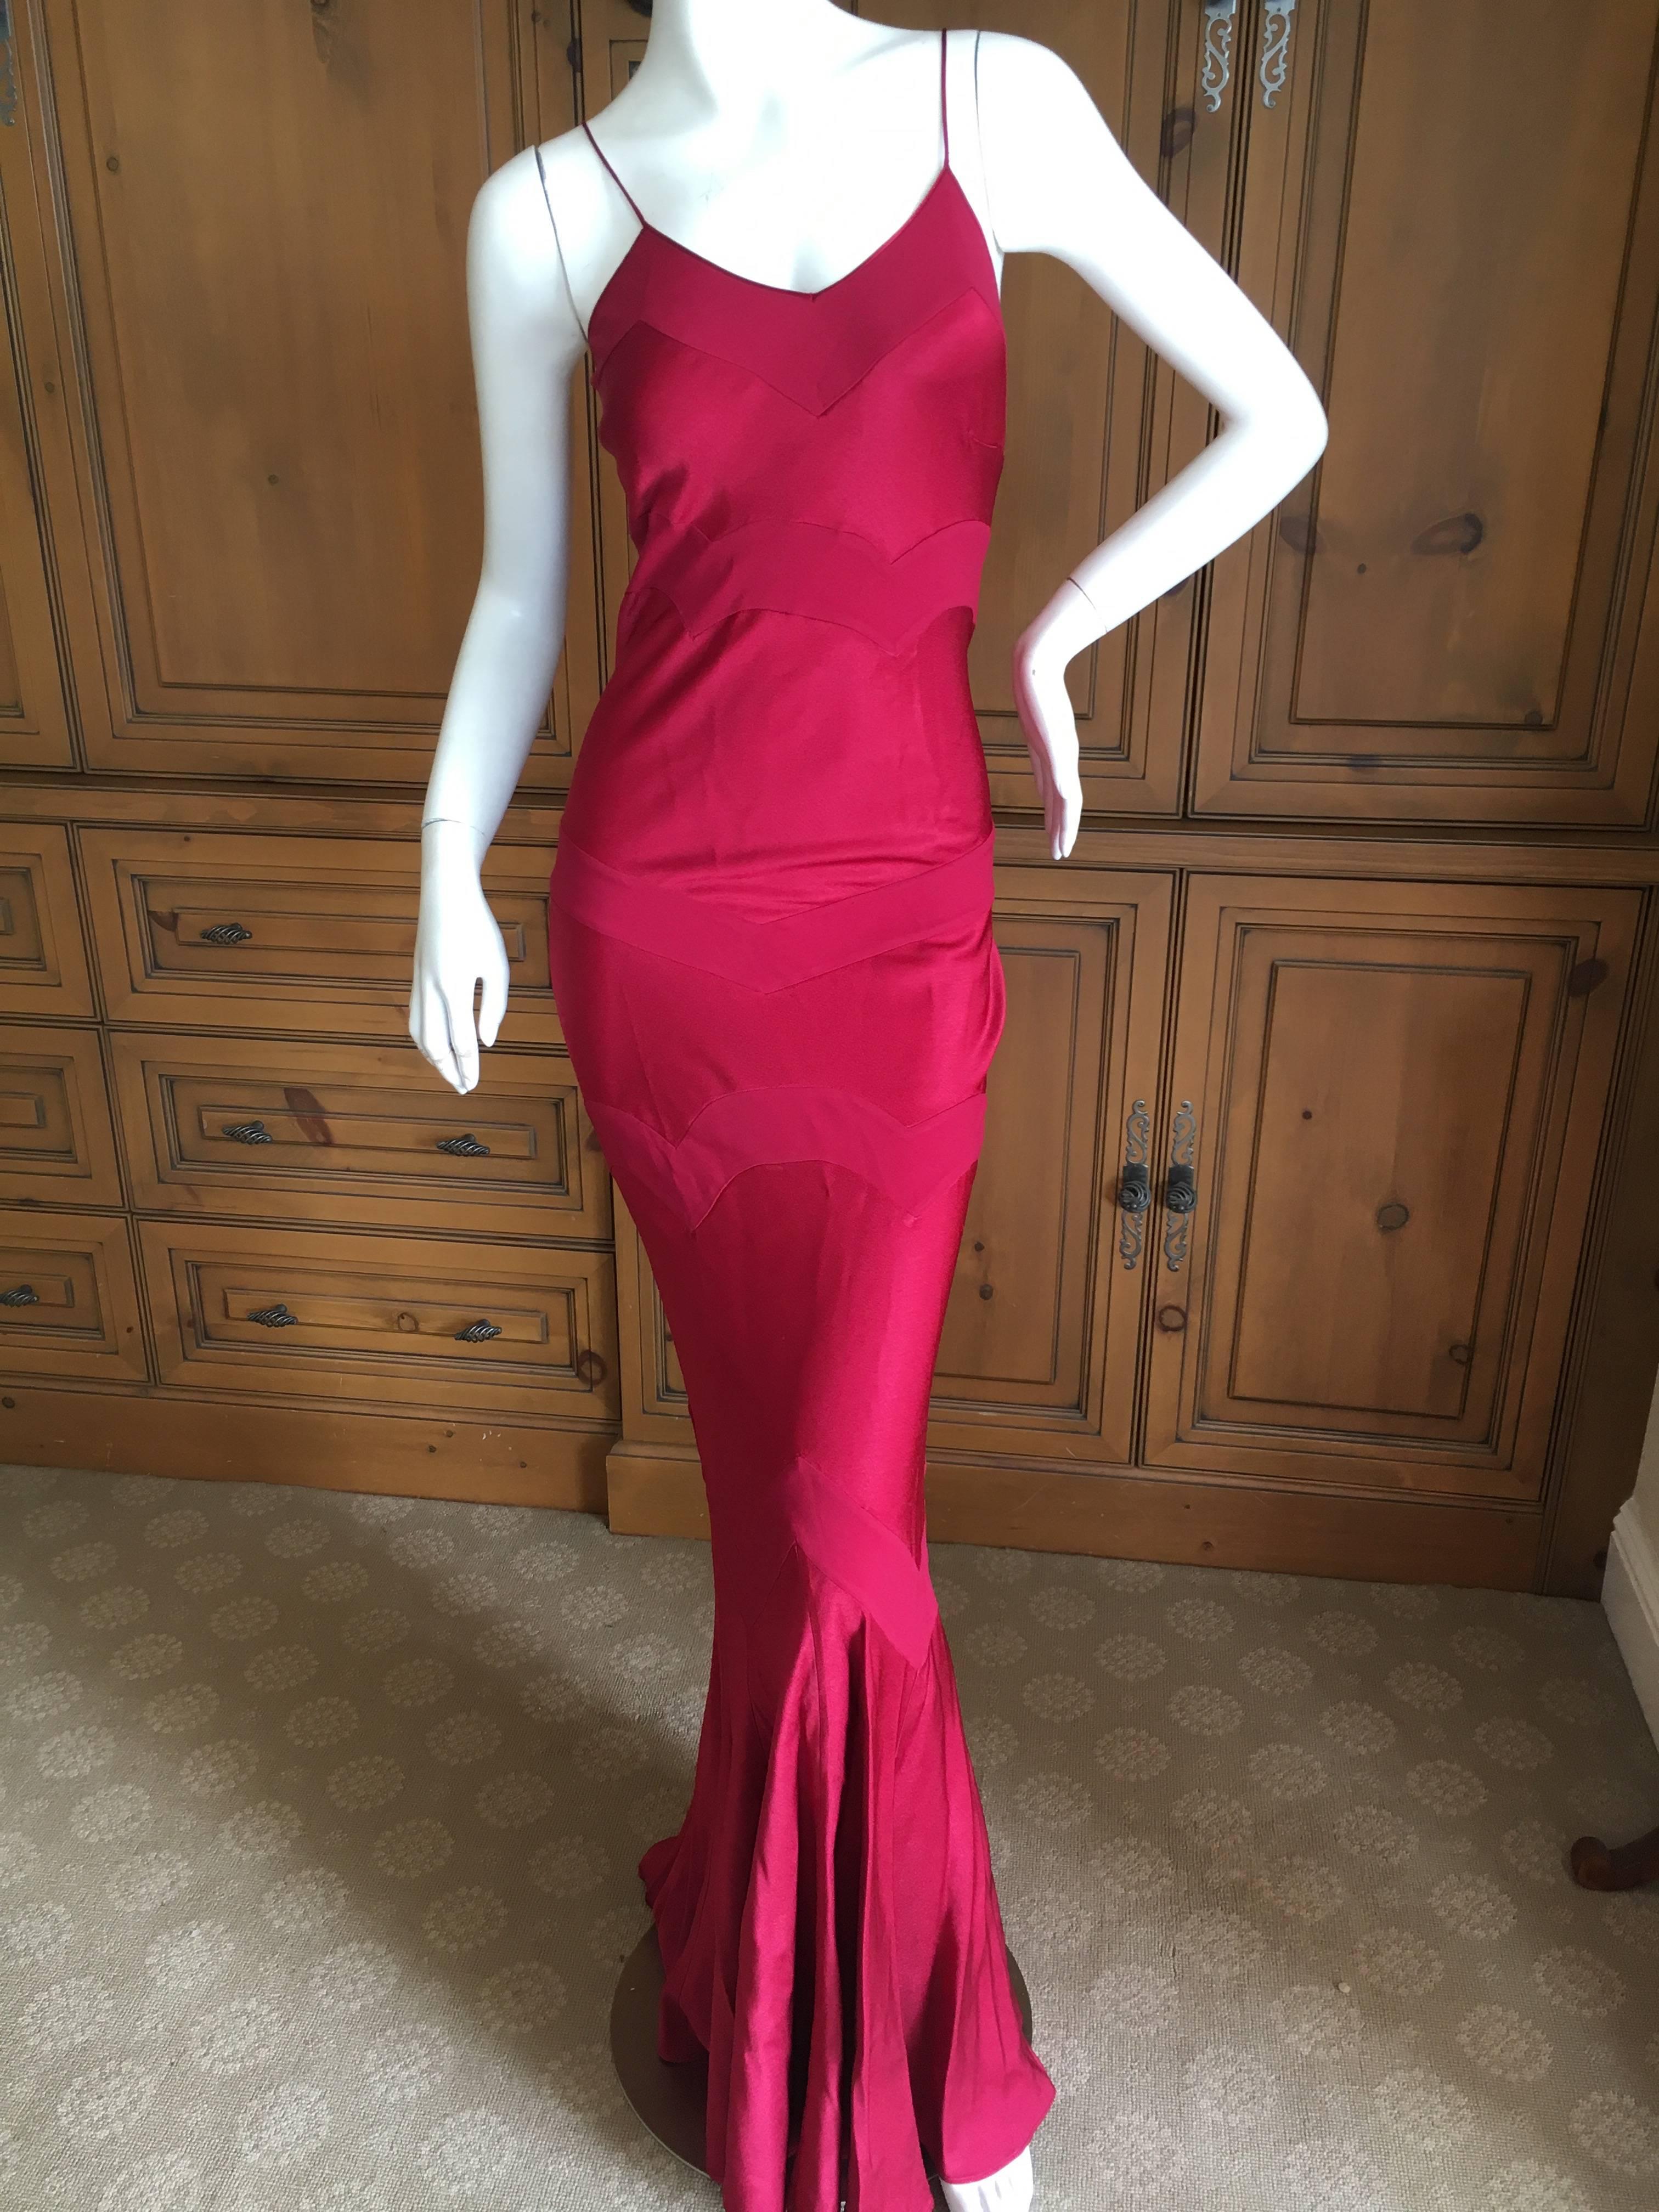 John Galliano Vintage 90's Deep Red Evening Dress

 Contrasting pattern red on red

Size  42

 Bust 38"

 Waist 34"

 Hips 44"

Length 63"

Excellent condition 

